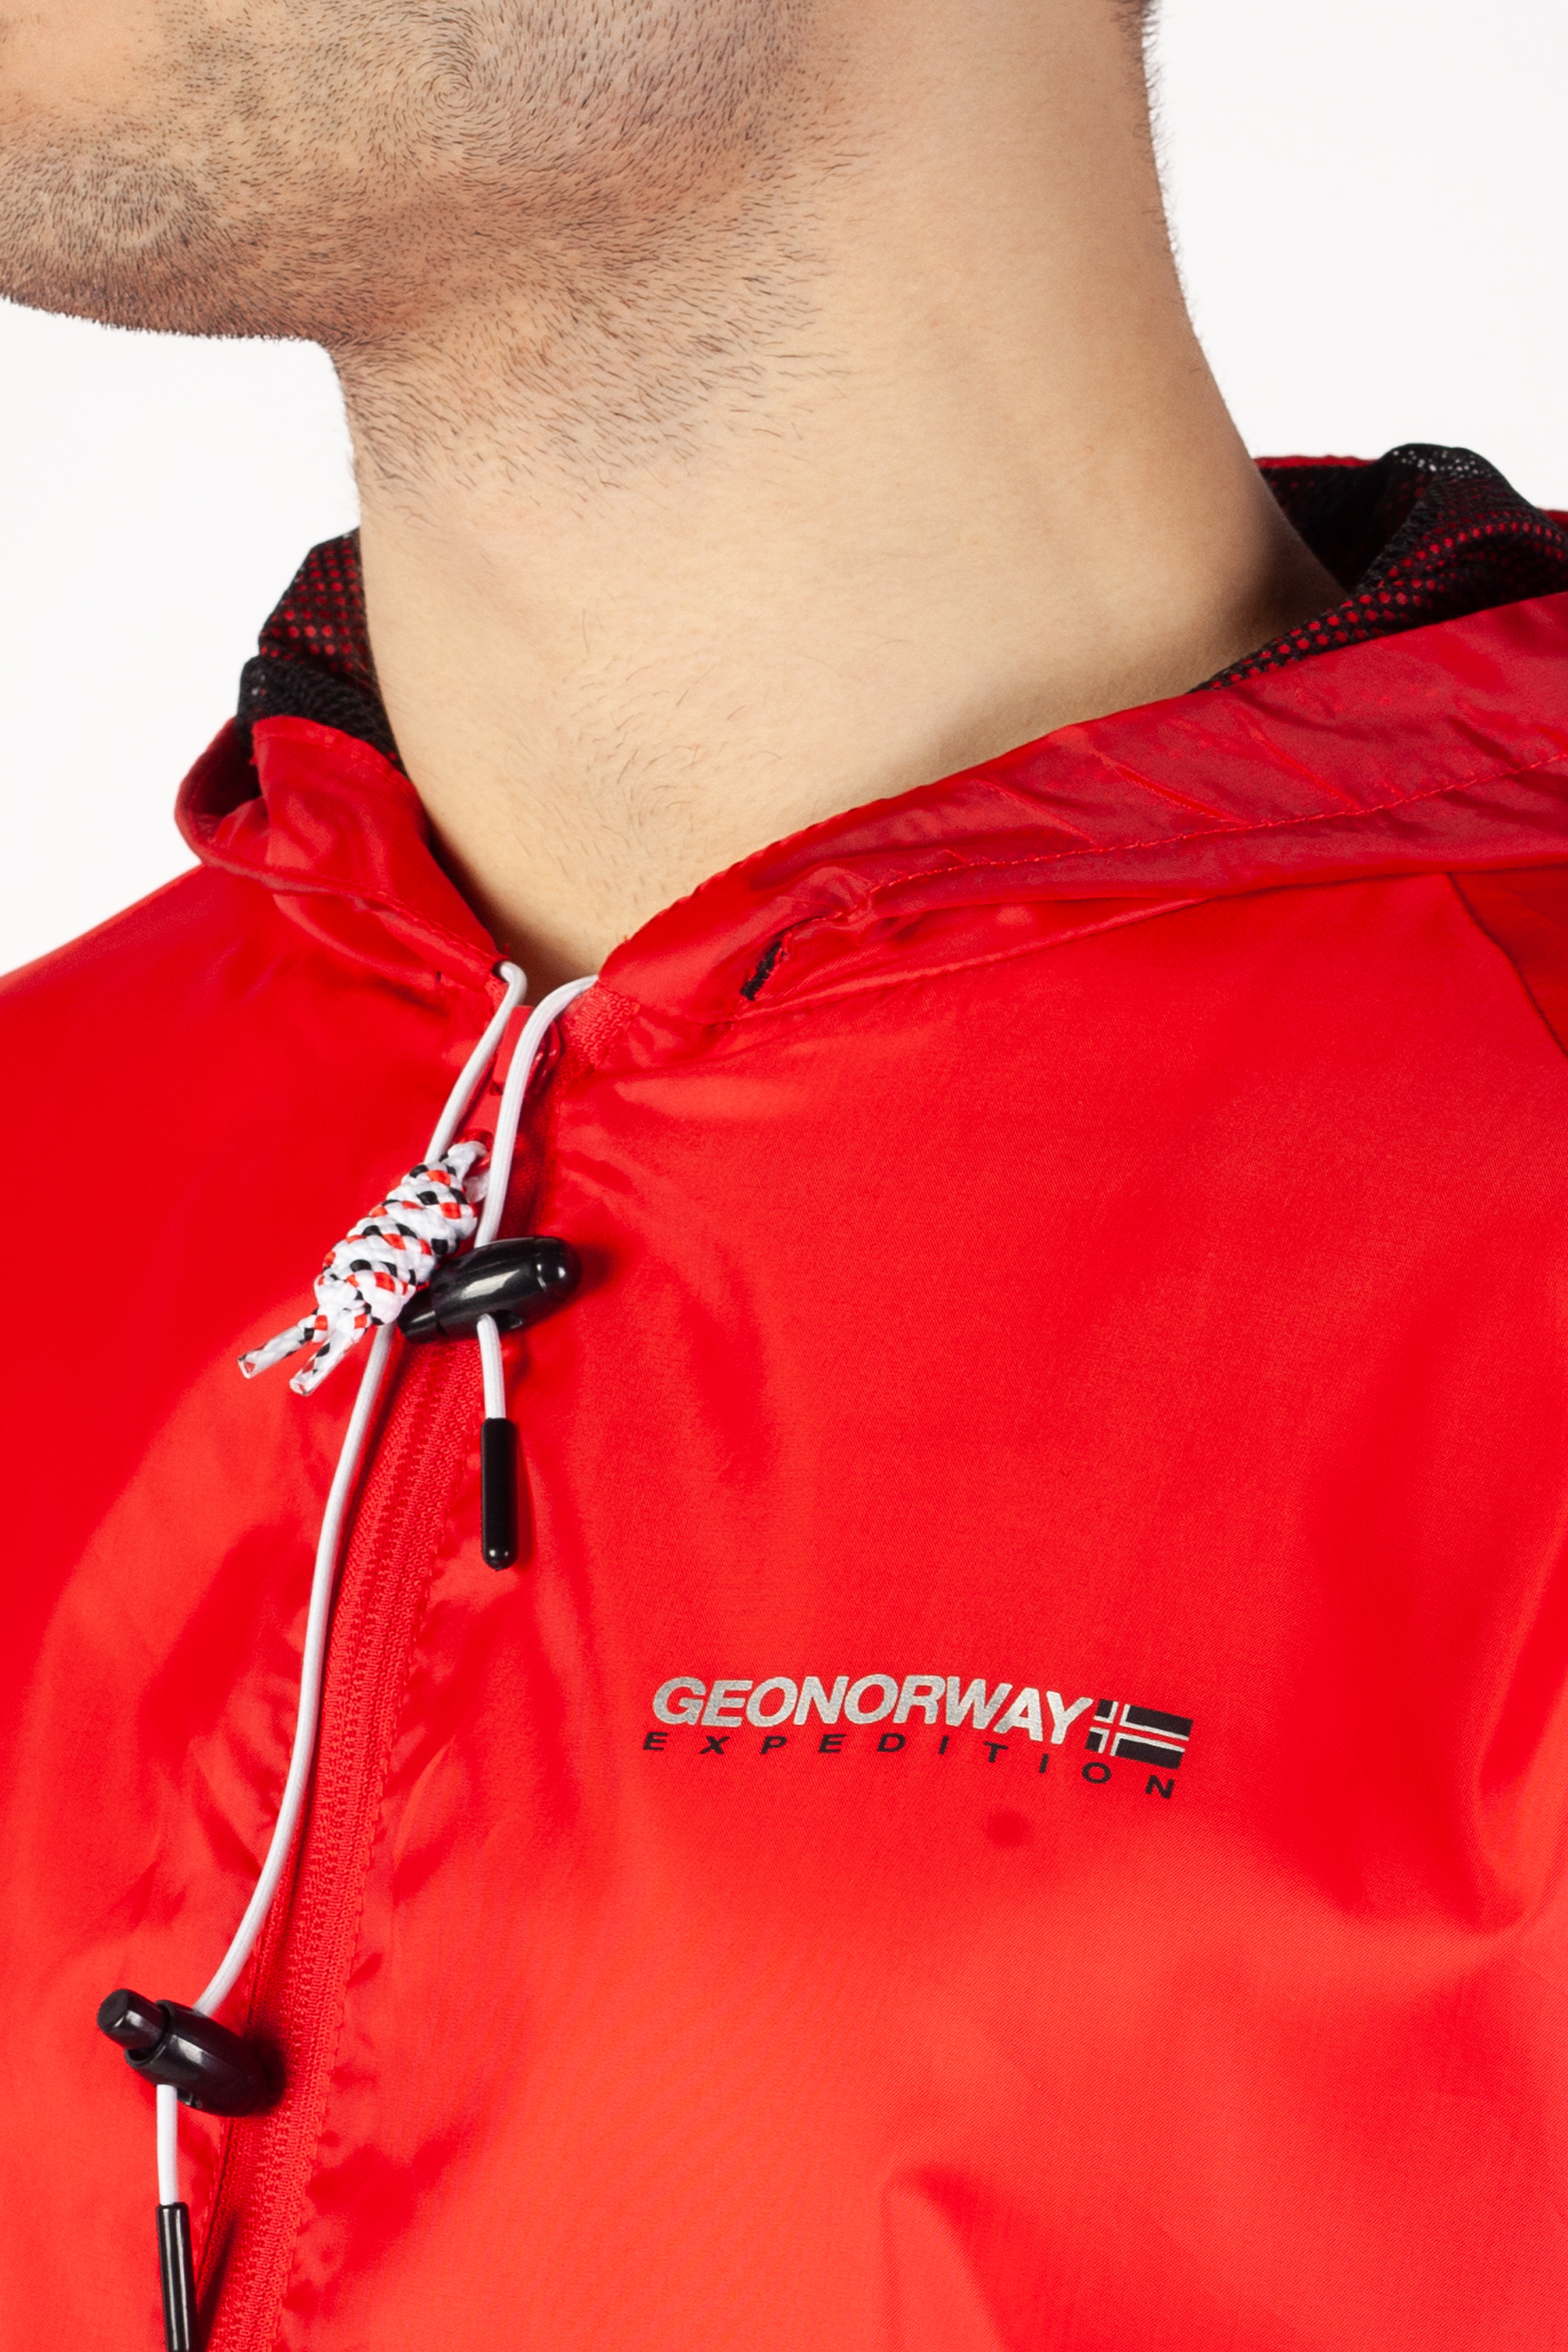 Regenmantel GEOGRAPHICAL NORWAY BOAT-Red